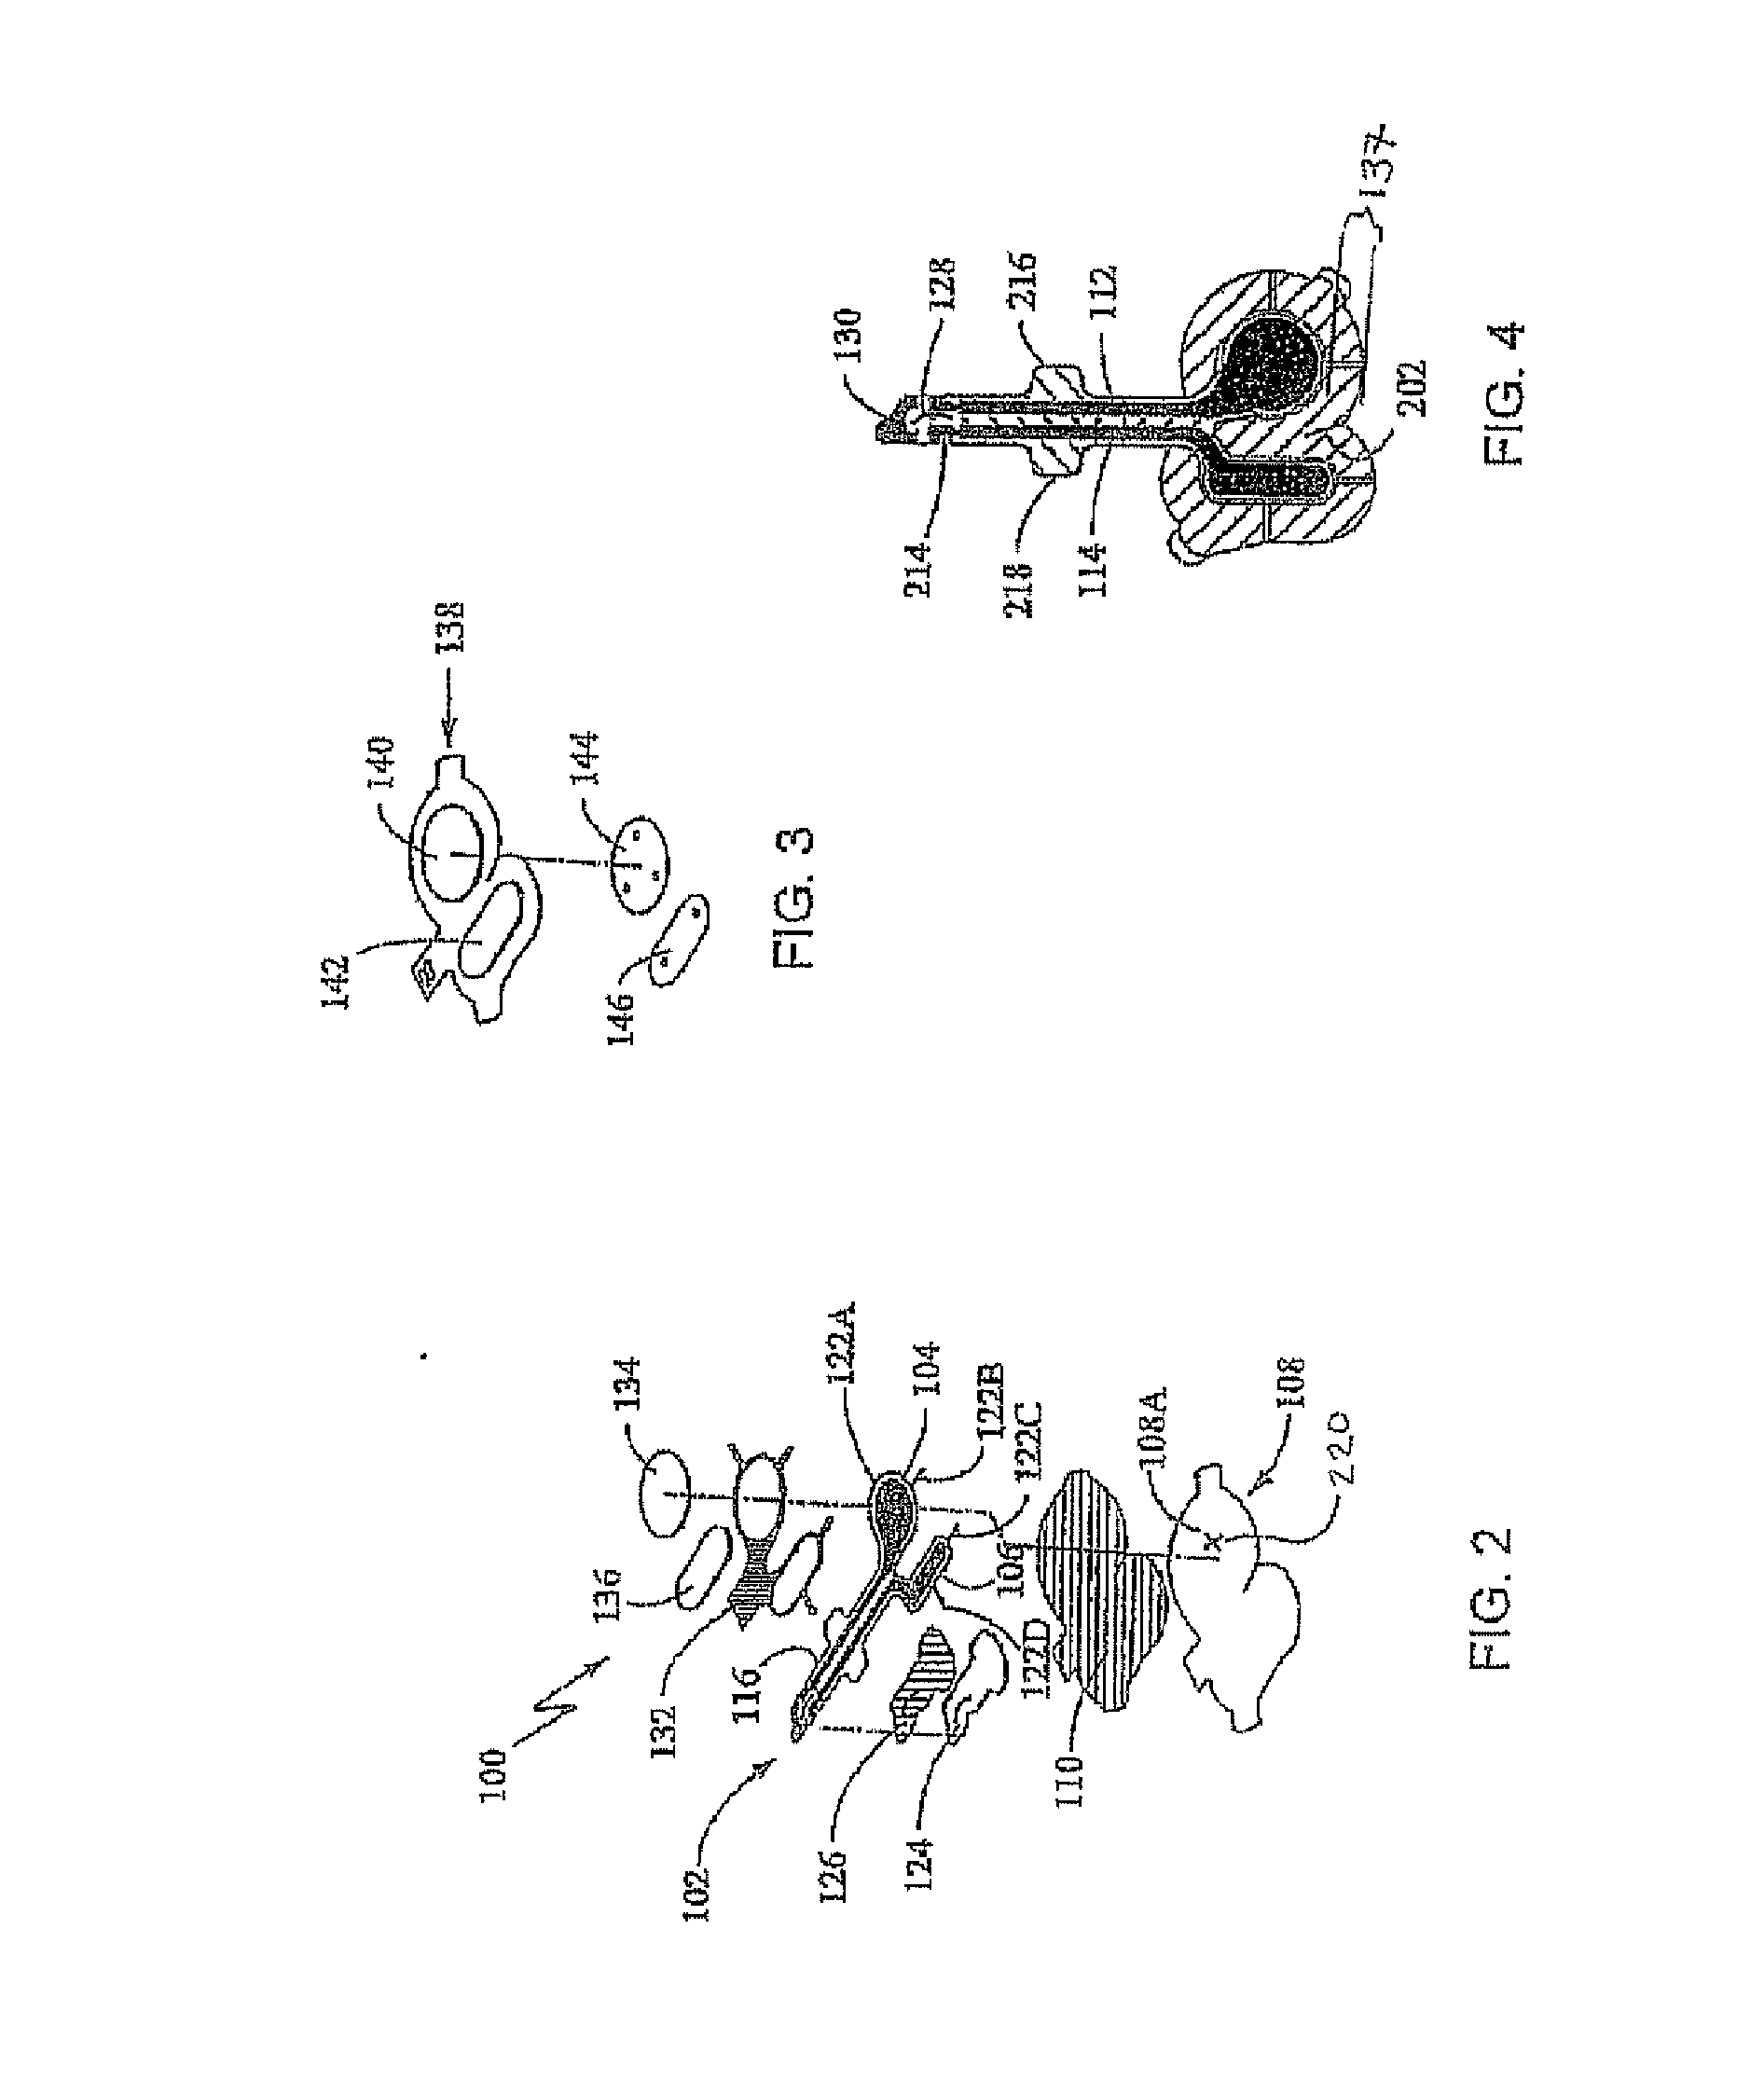 Iontophoresis Drug Delivery Device Providing Acceptable Depth and Duration of Dermal Anesthesia